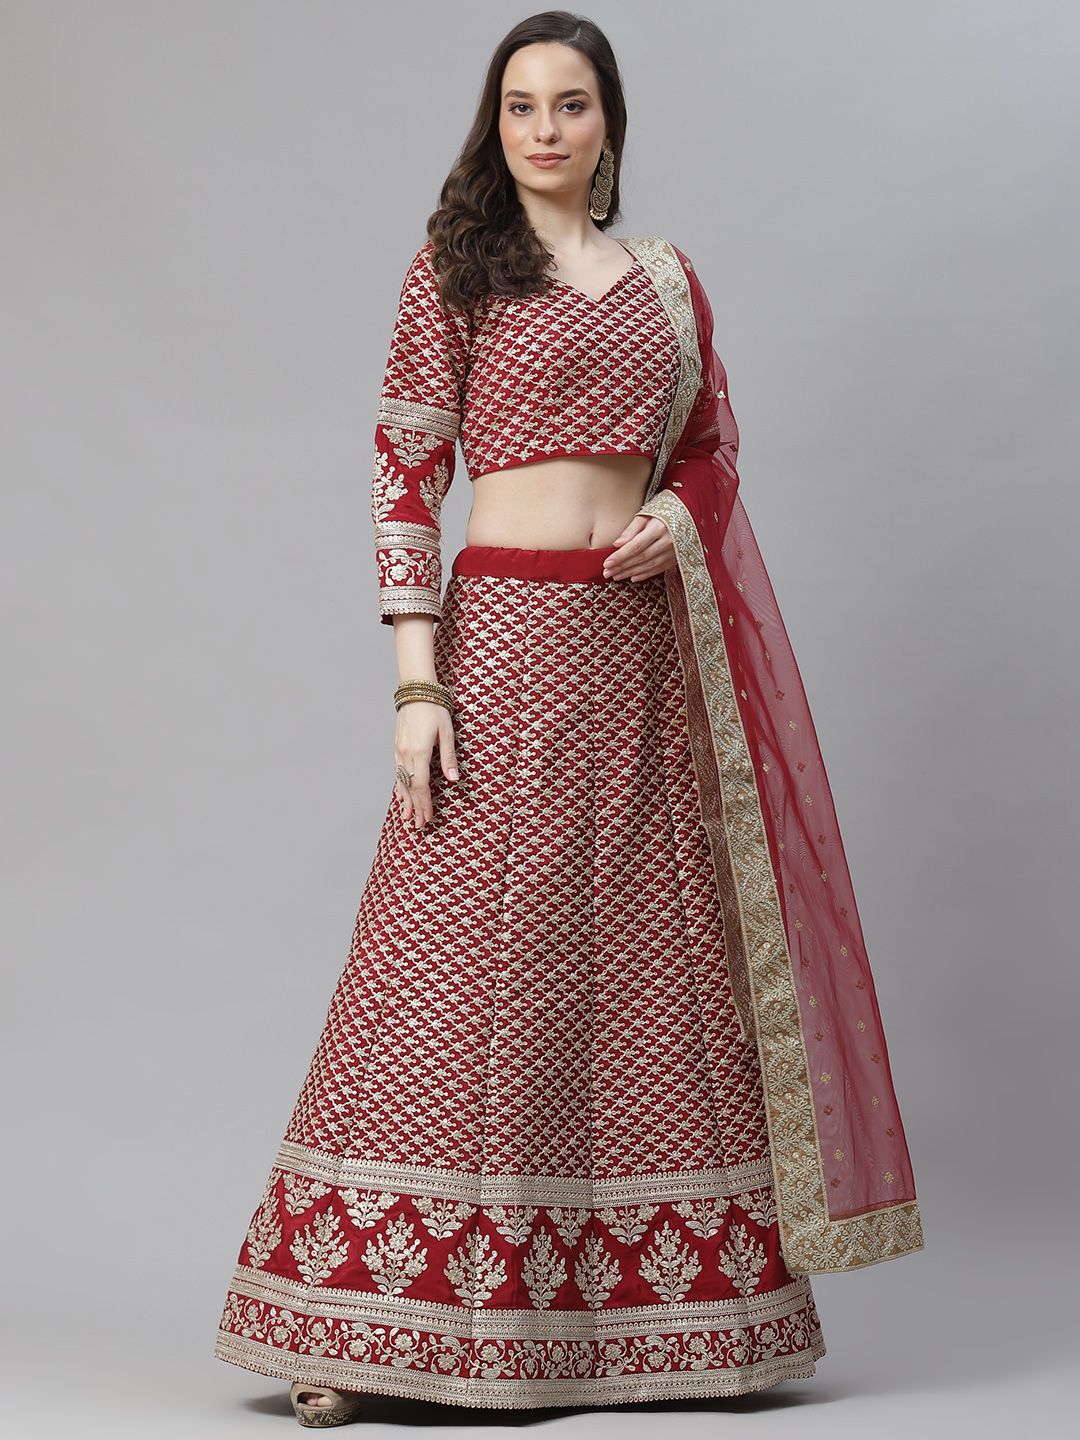 Readiprint Fashions Maroon & Gold-Toned Embroidered Semi-Stitched Lehenga & Blouse With Dupatta Price in India